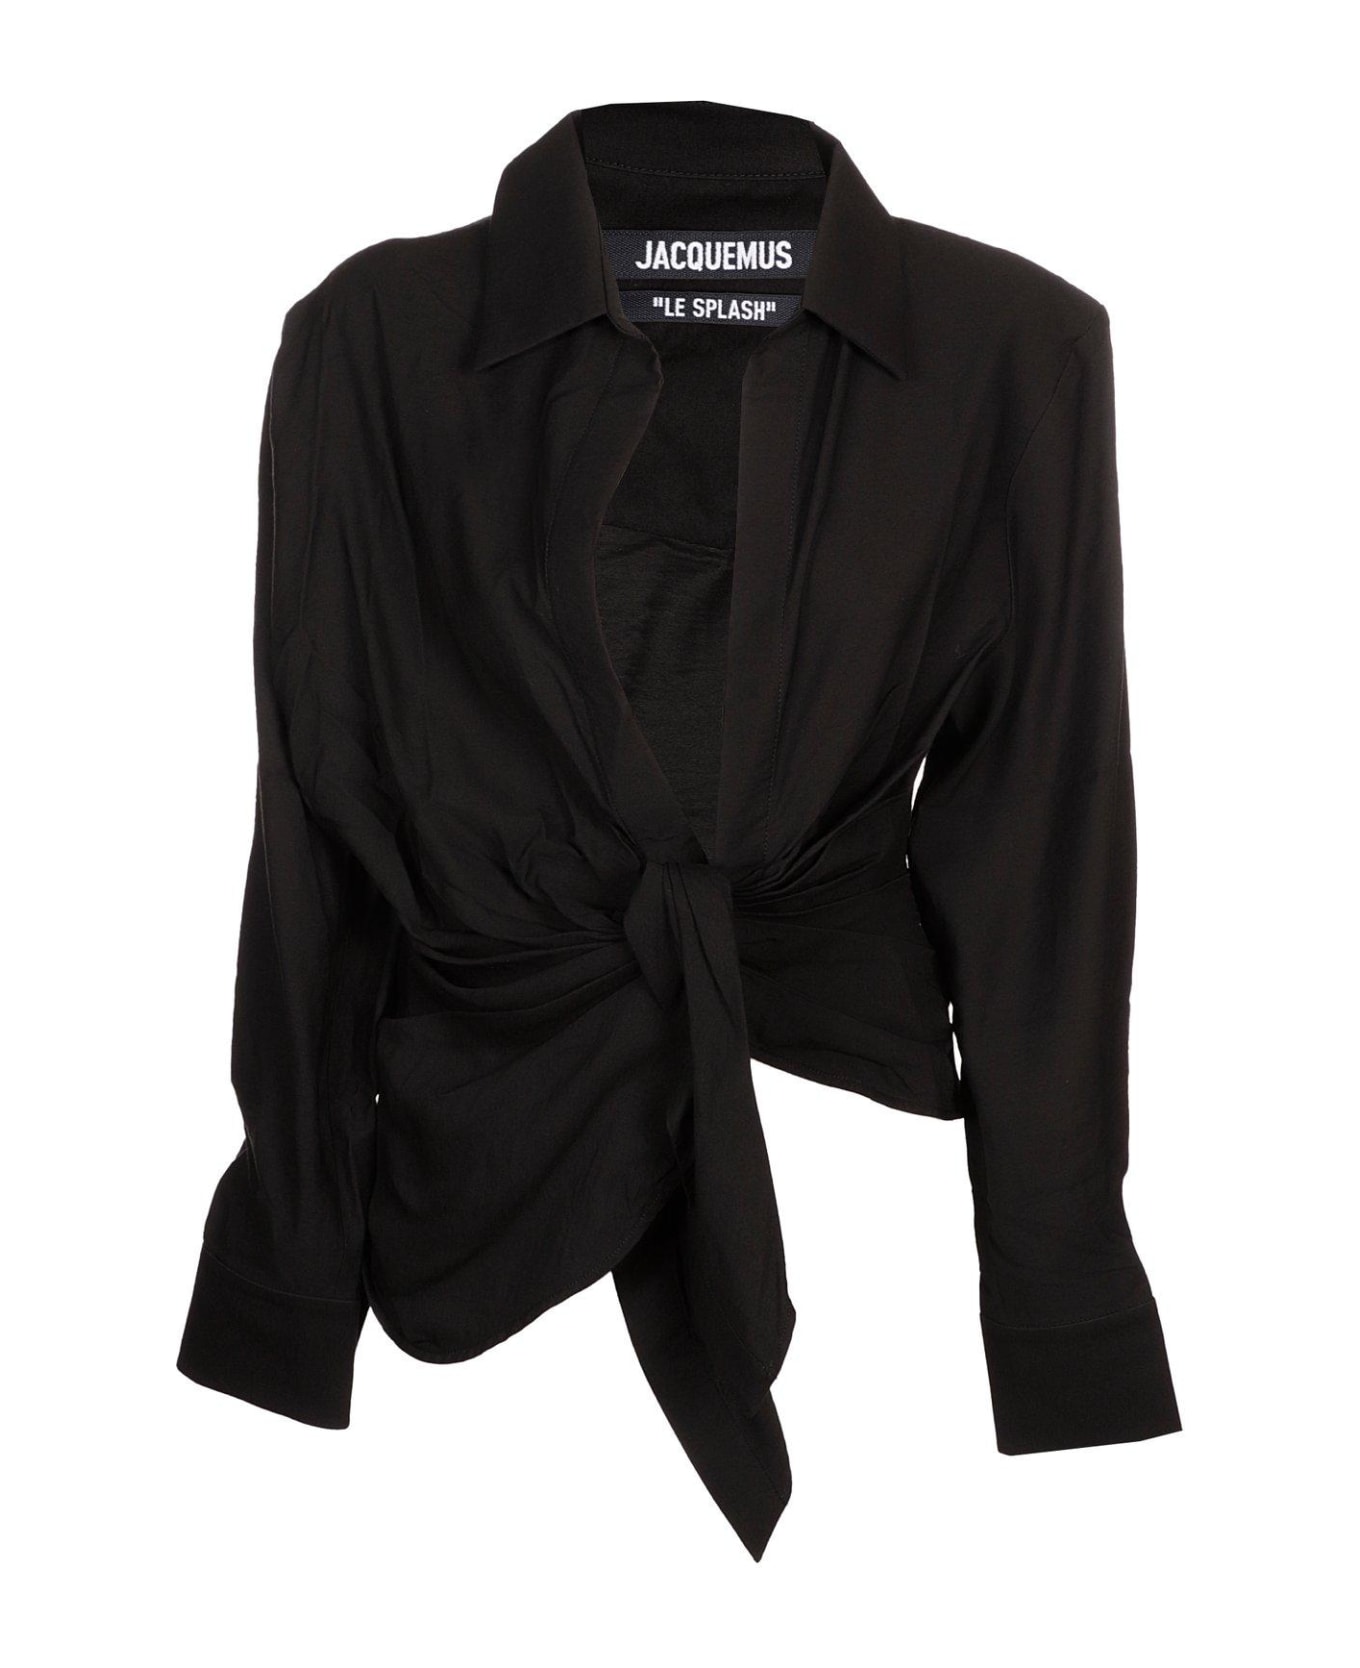 Jacquemus Bahlia Tie-up Detailed Blouse - Black ブラウス